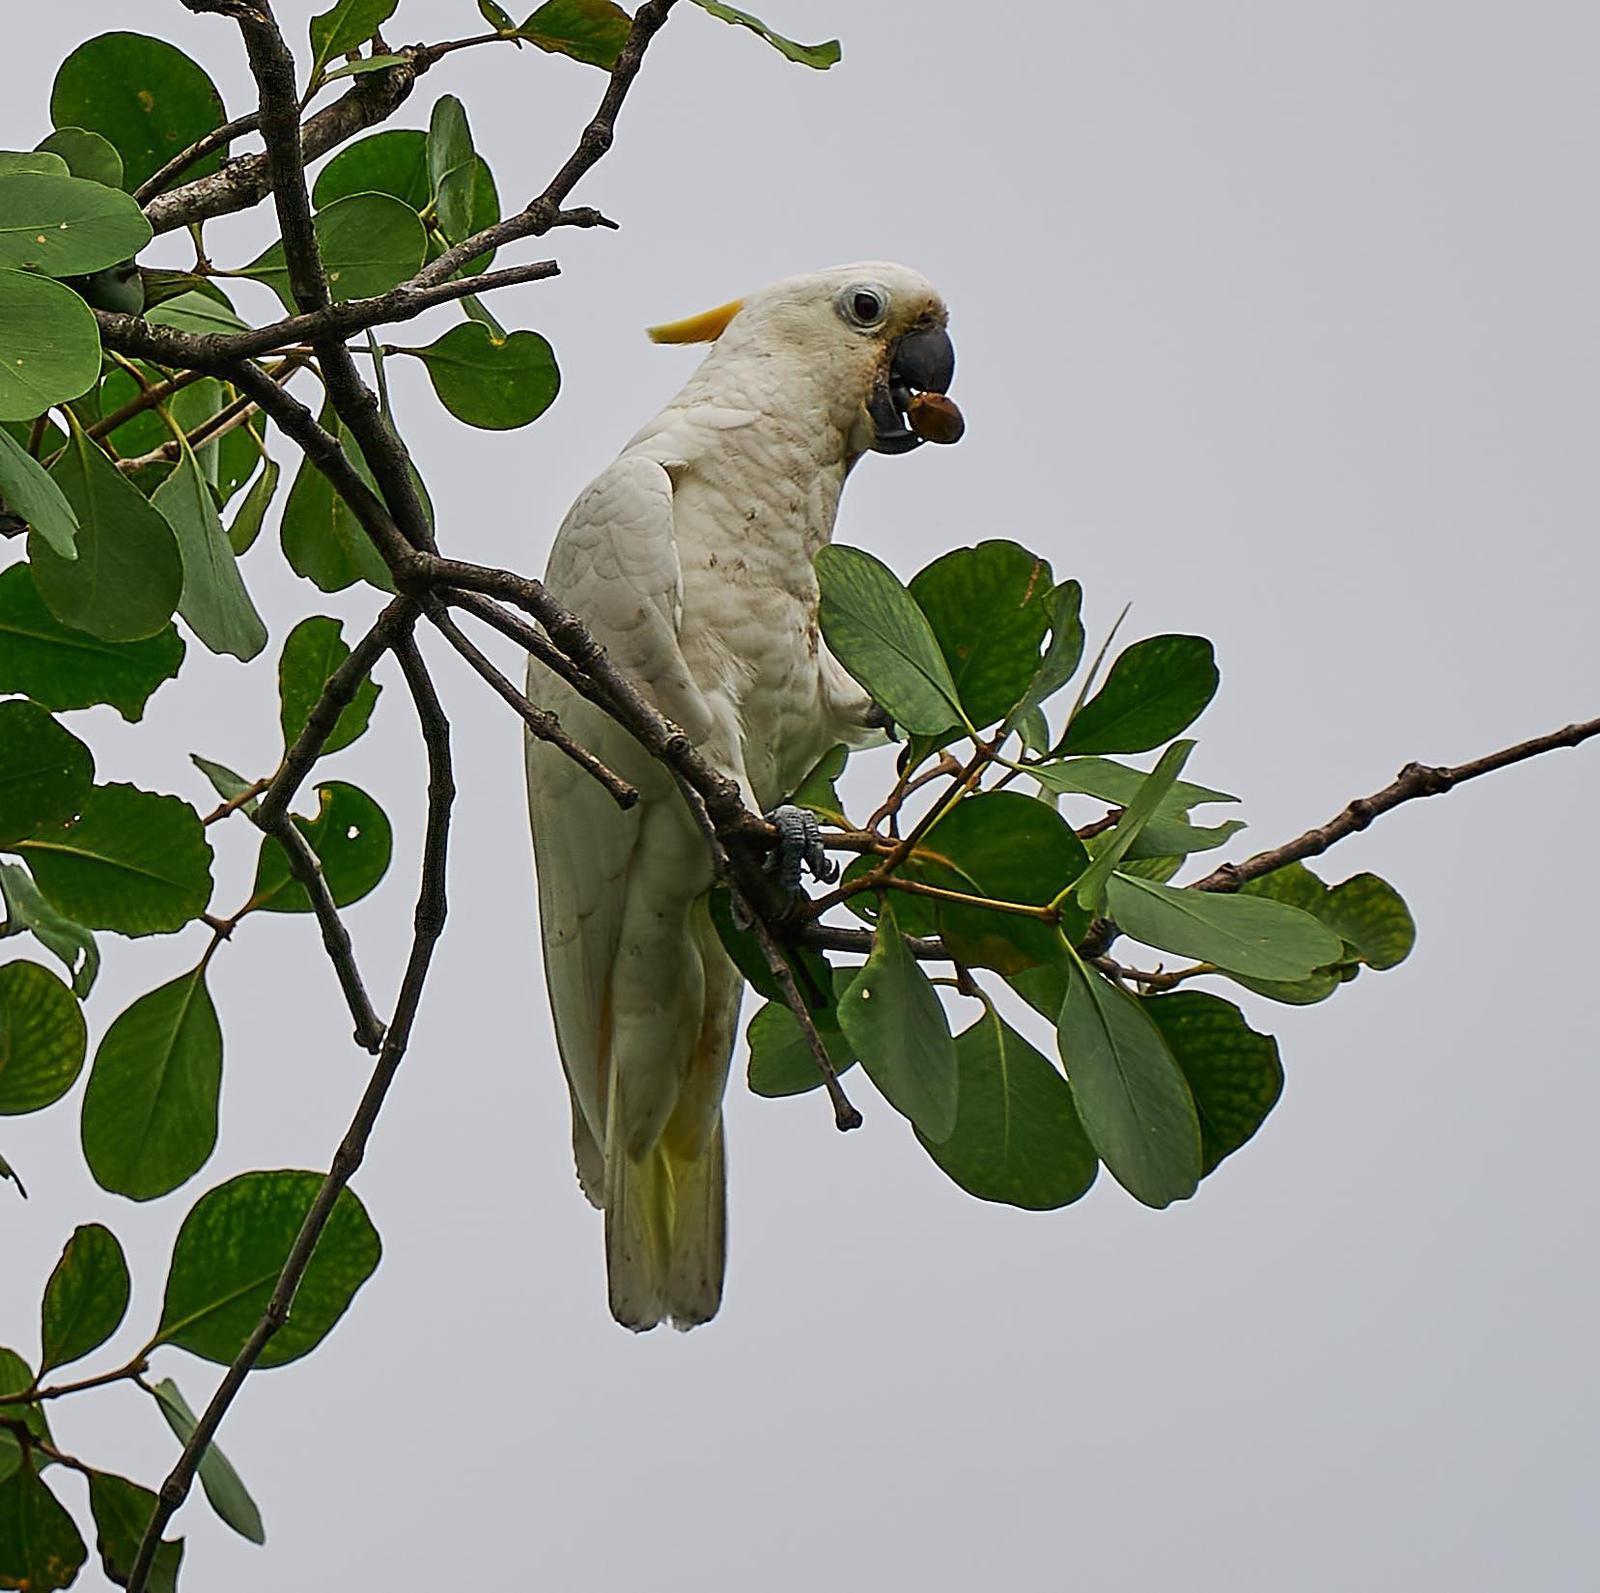 Sulphur-crested Cockatoo Photo by Steven Cheong